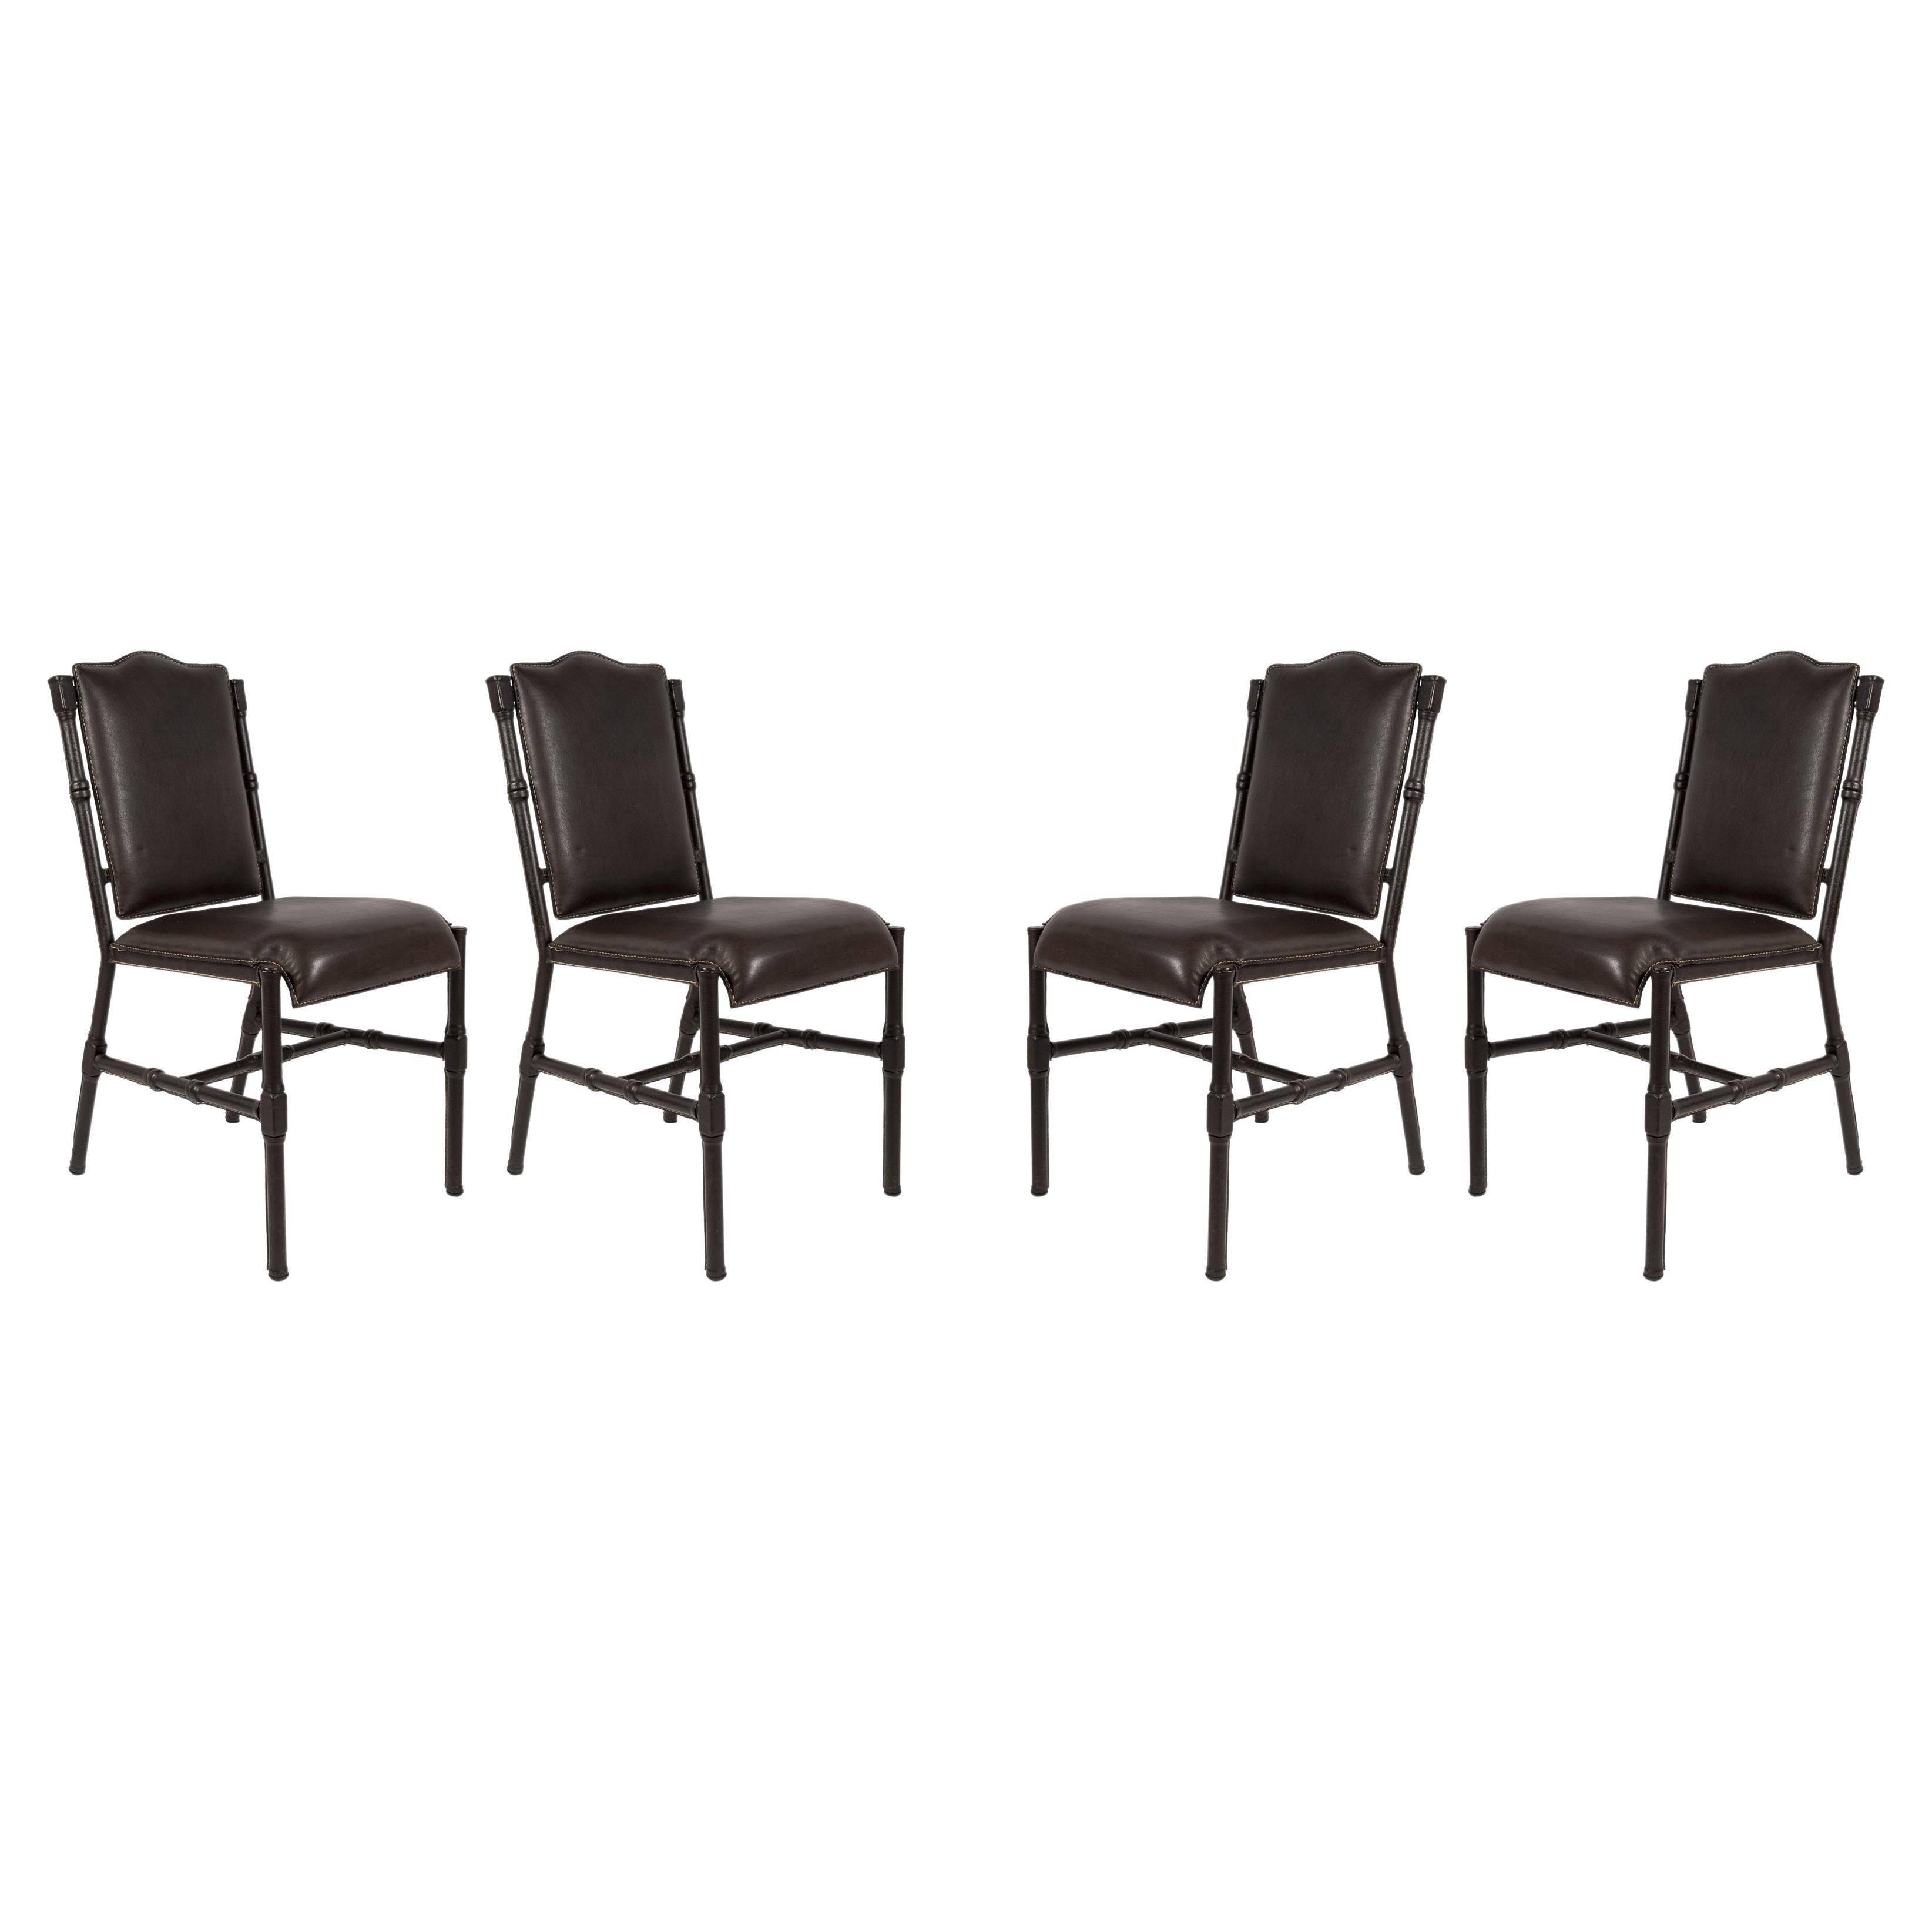 Set of 4 Stitched Leather Dinning Chairs by Jacques Adnet